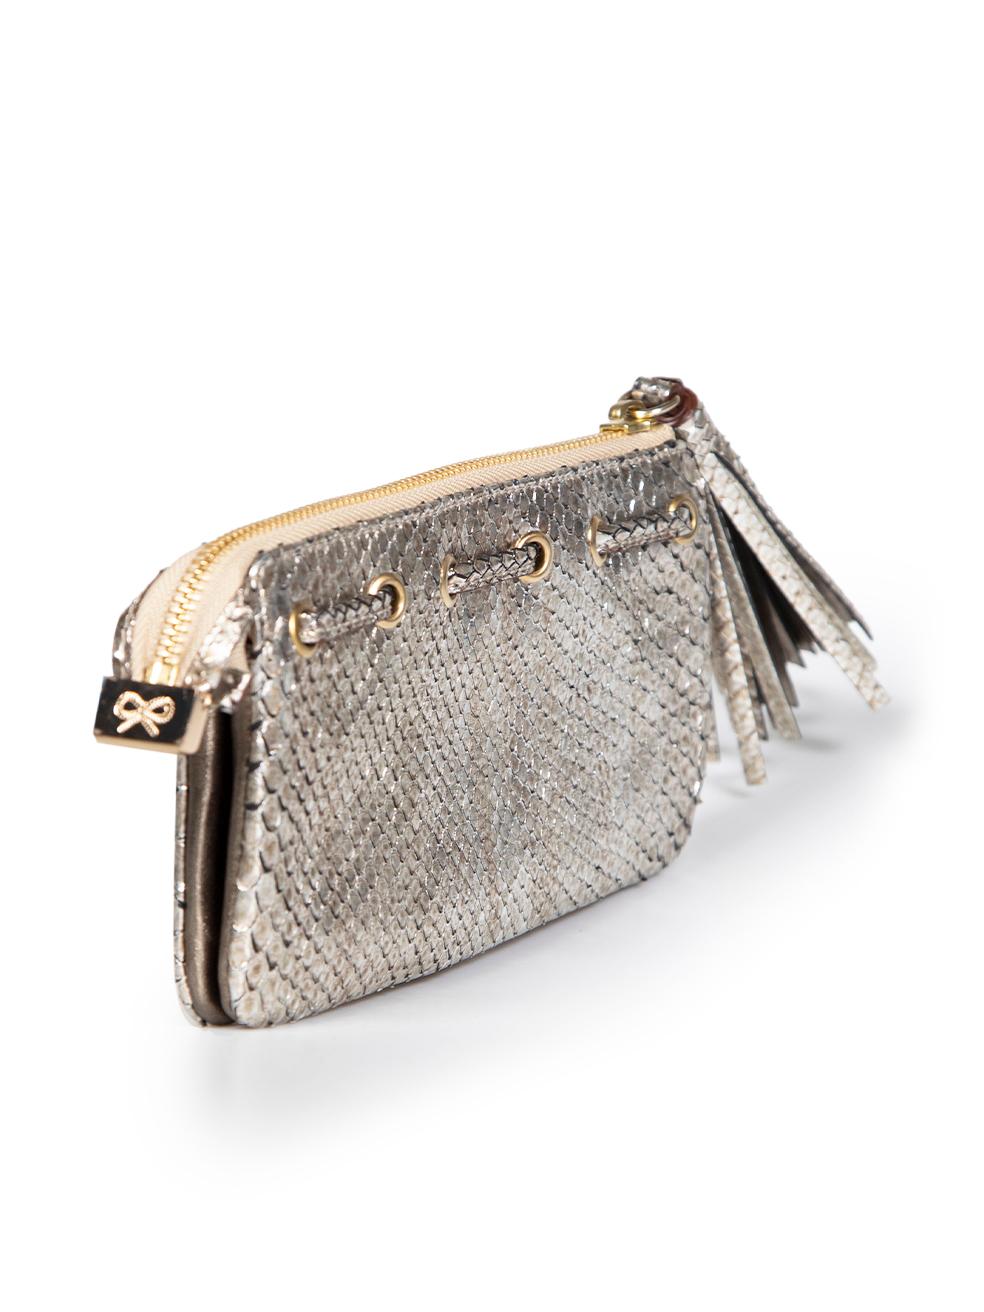 CONDITION is Very good. Minimal wear to card holder is evident. Minimal wear to the exterior with some very light peeling and discolouration of the snakeskin on this used Anya Hindmarch designer resale item.
 
 
 
 Details
 
 
 Silver
 
 Python